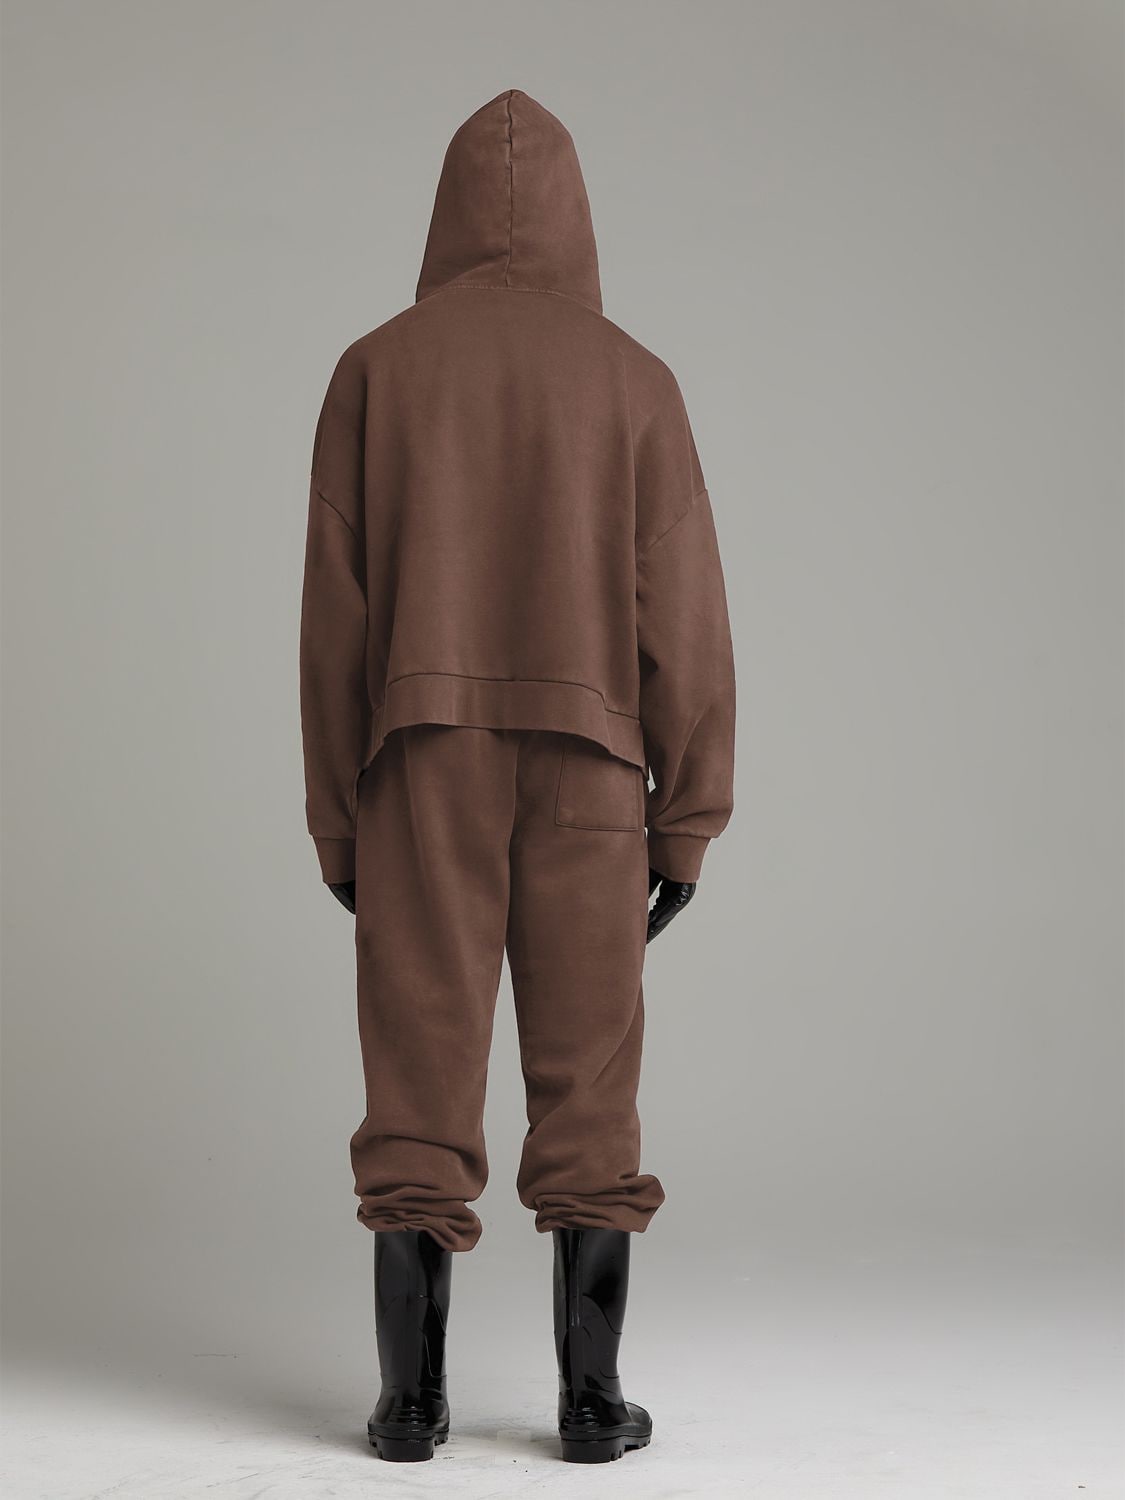 Shop Entire Studios Heavy Hood Washed Cotton Hoodie In Brown